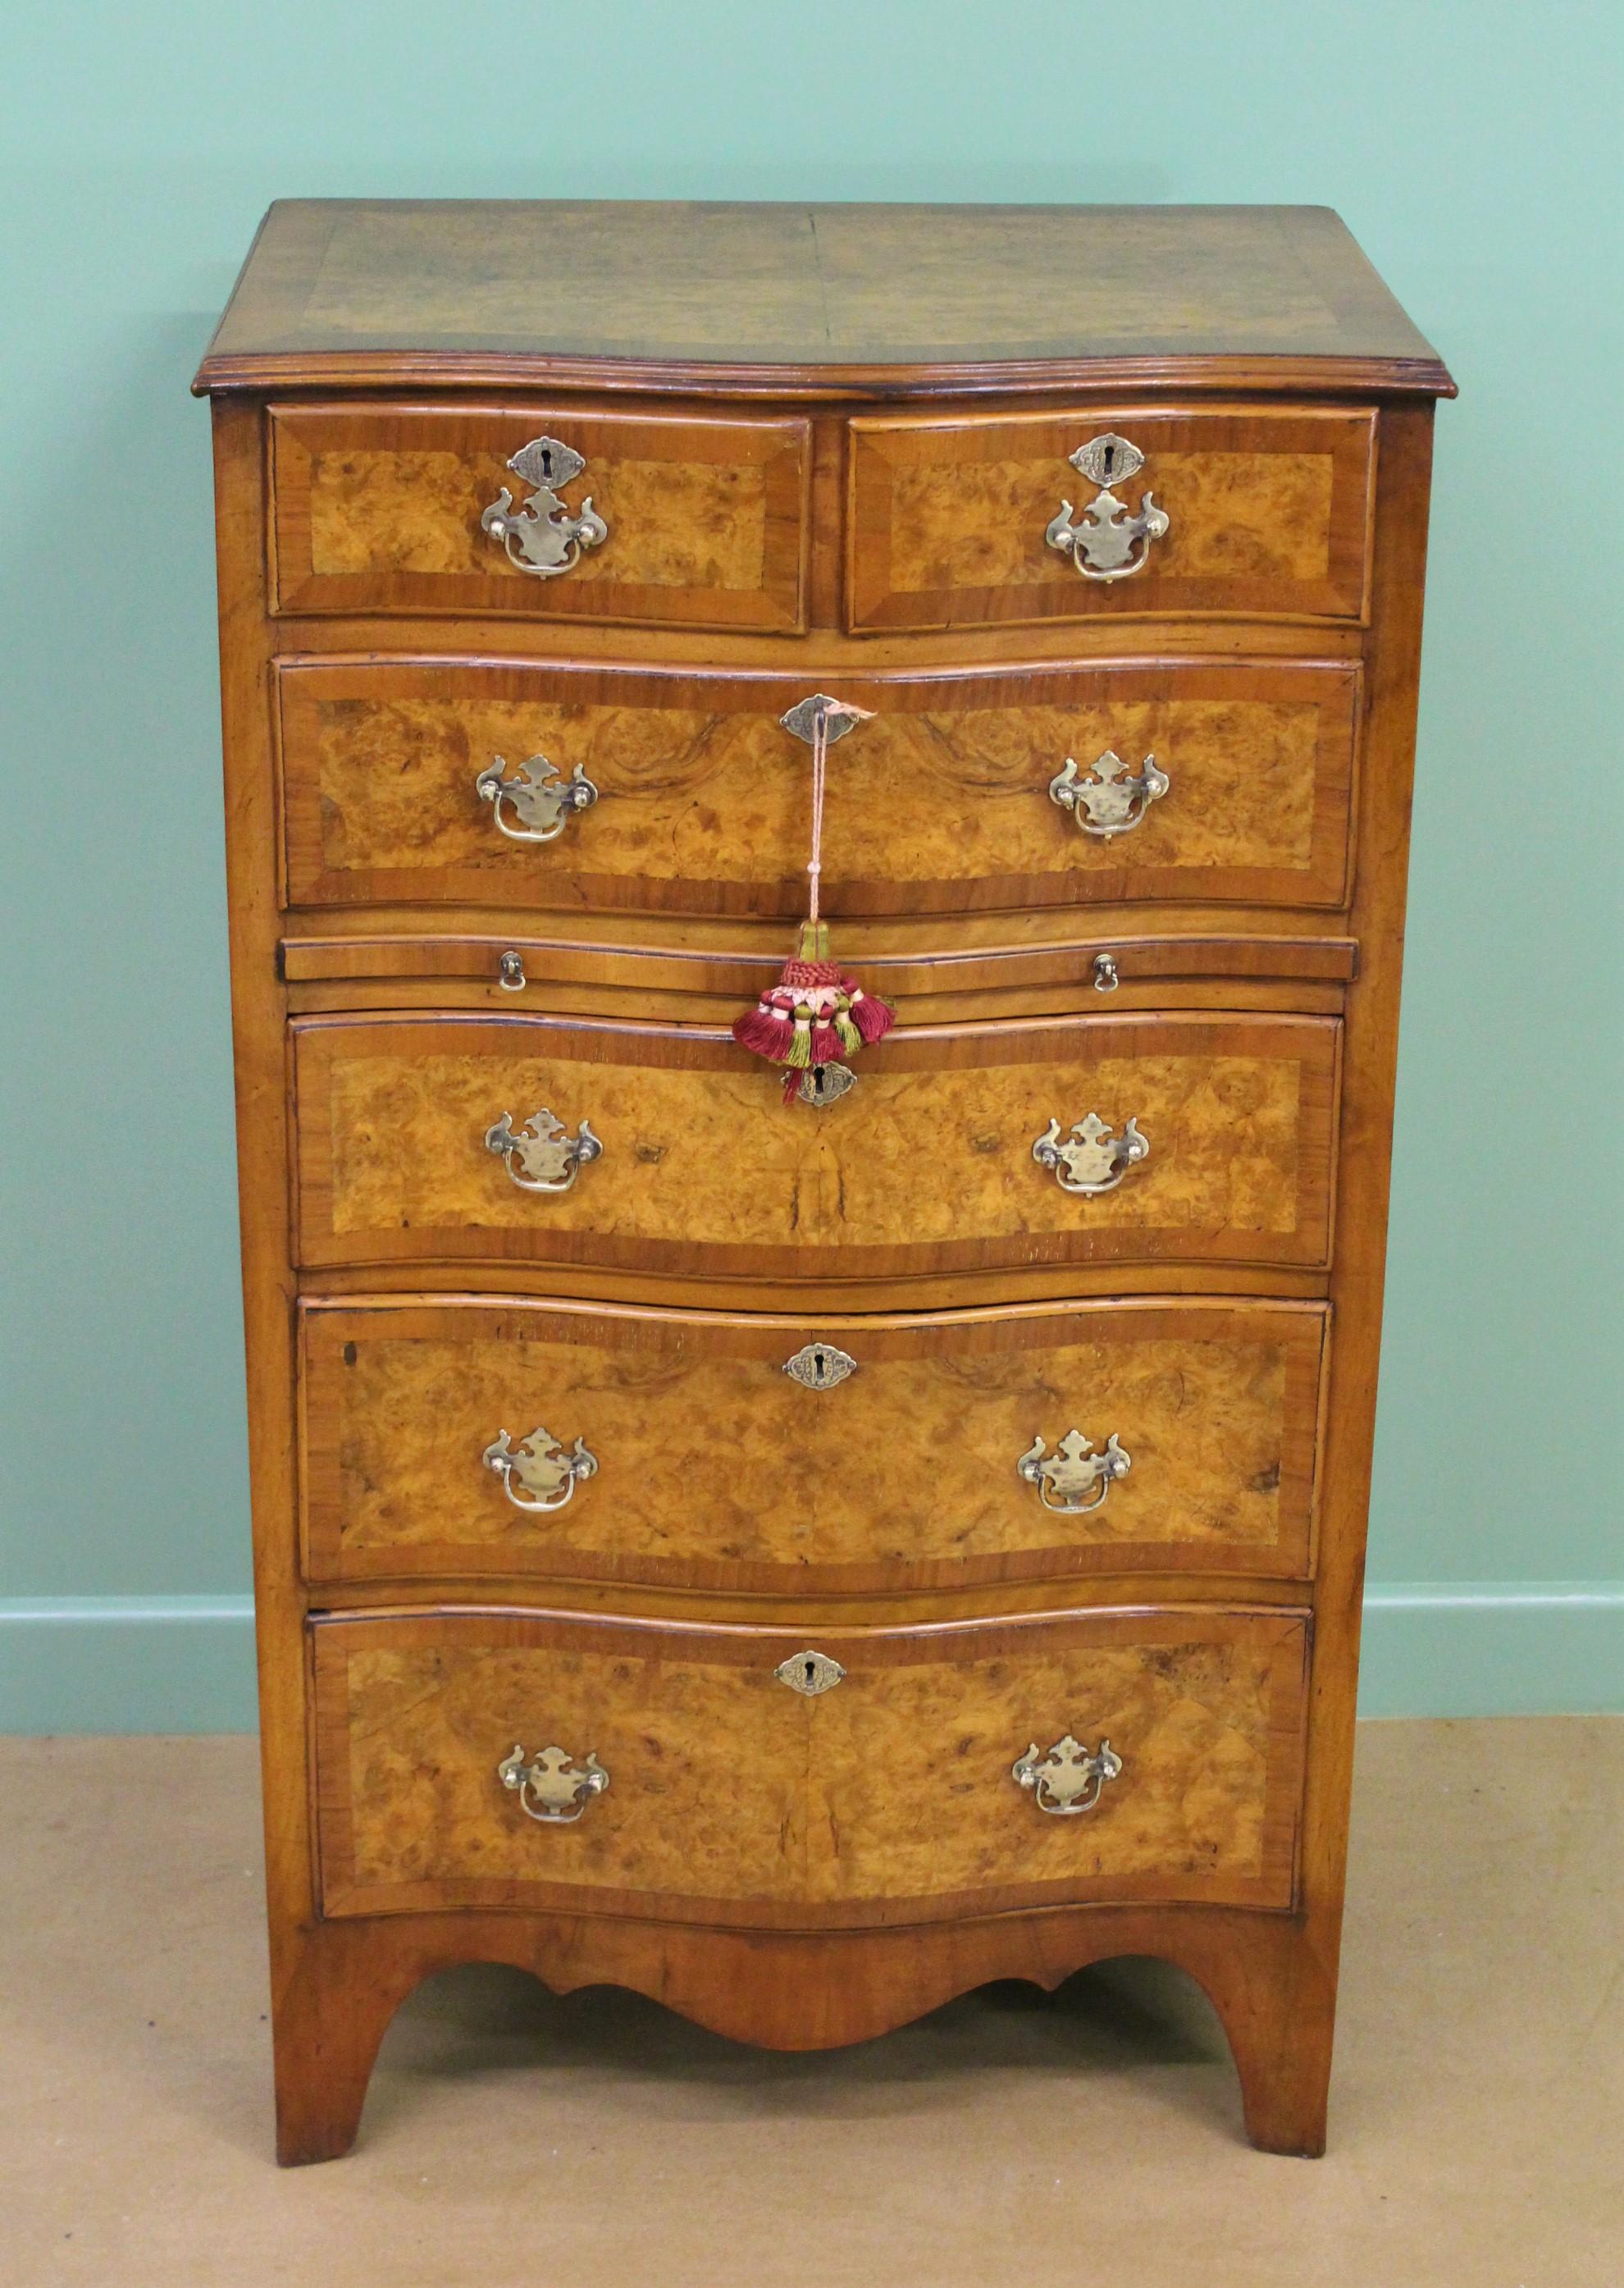 A charming burr walnut serpentine fronted chest of drawers. Well constructed in solid walnut with attractive burr walnut veneers. There is an arrangement of 2 short over 4 long, graduated drawers; and a brushing slide. The serpentine shaped top and